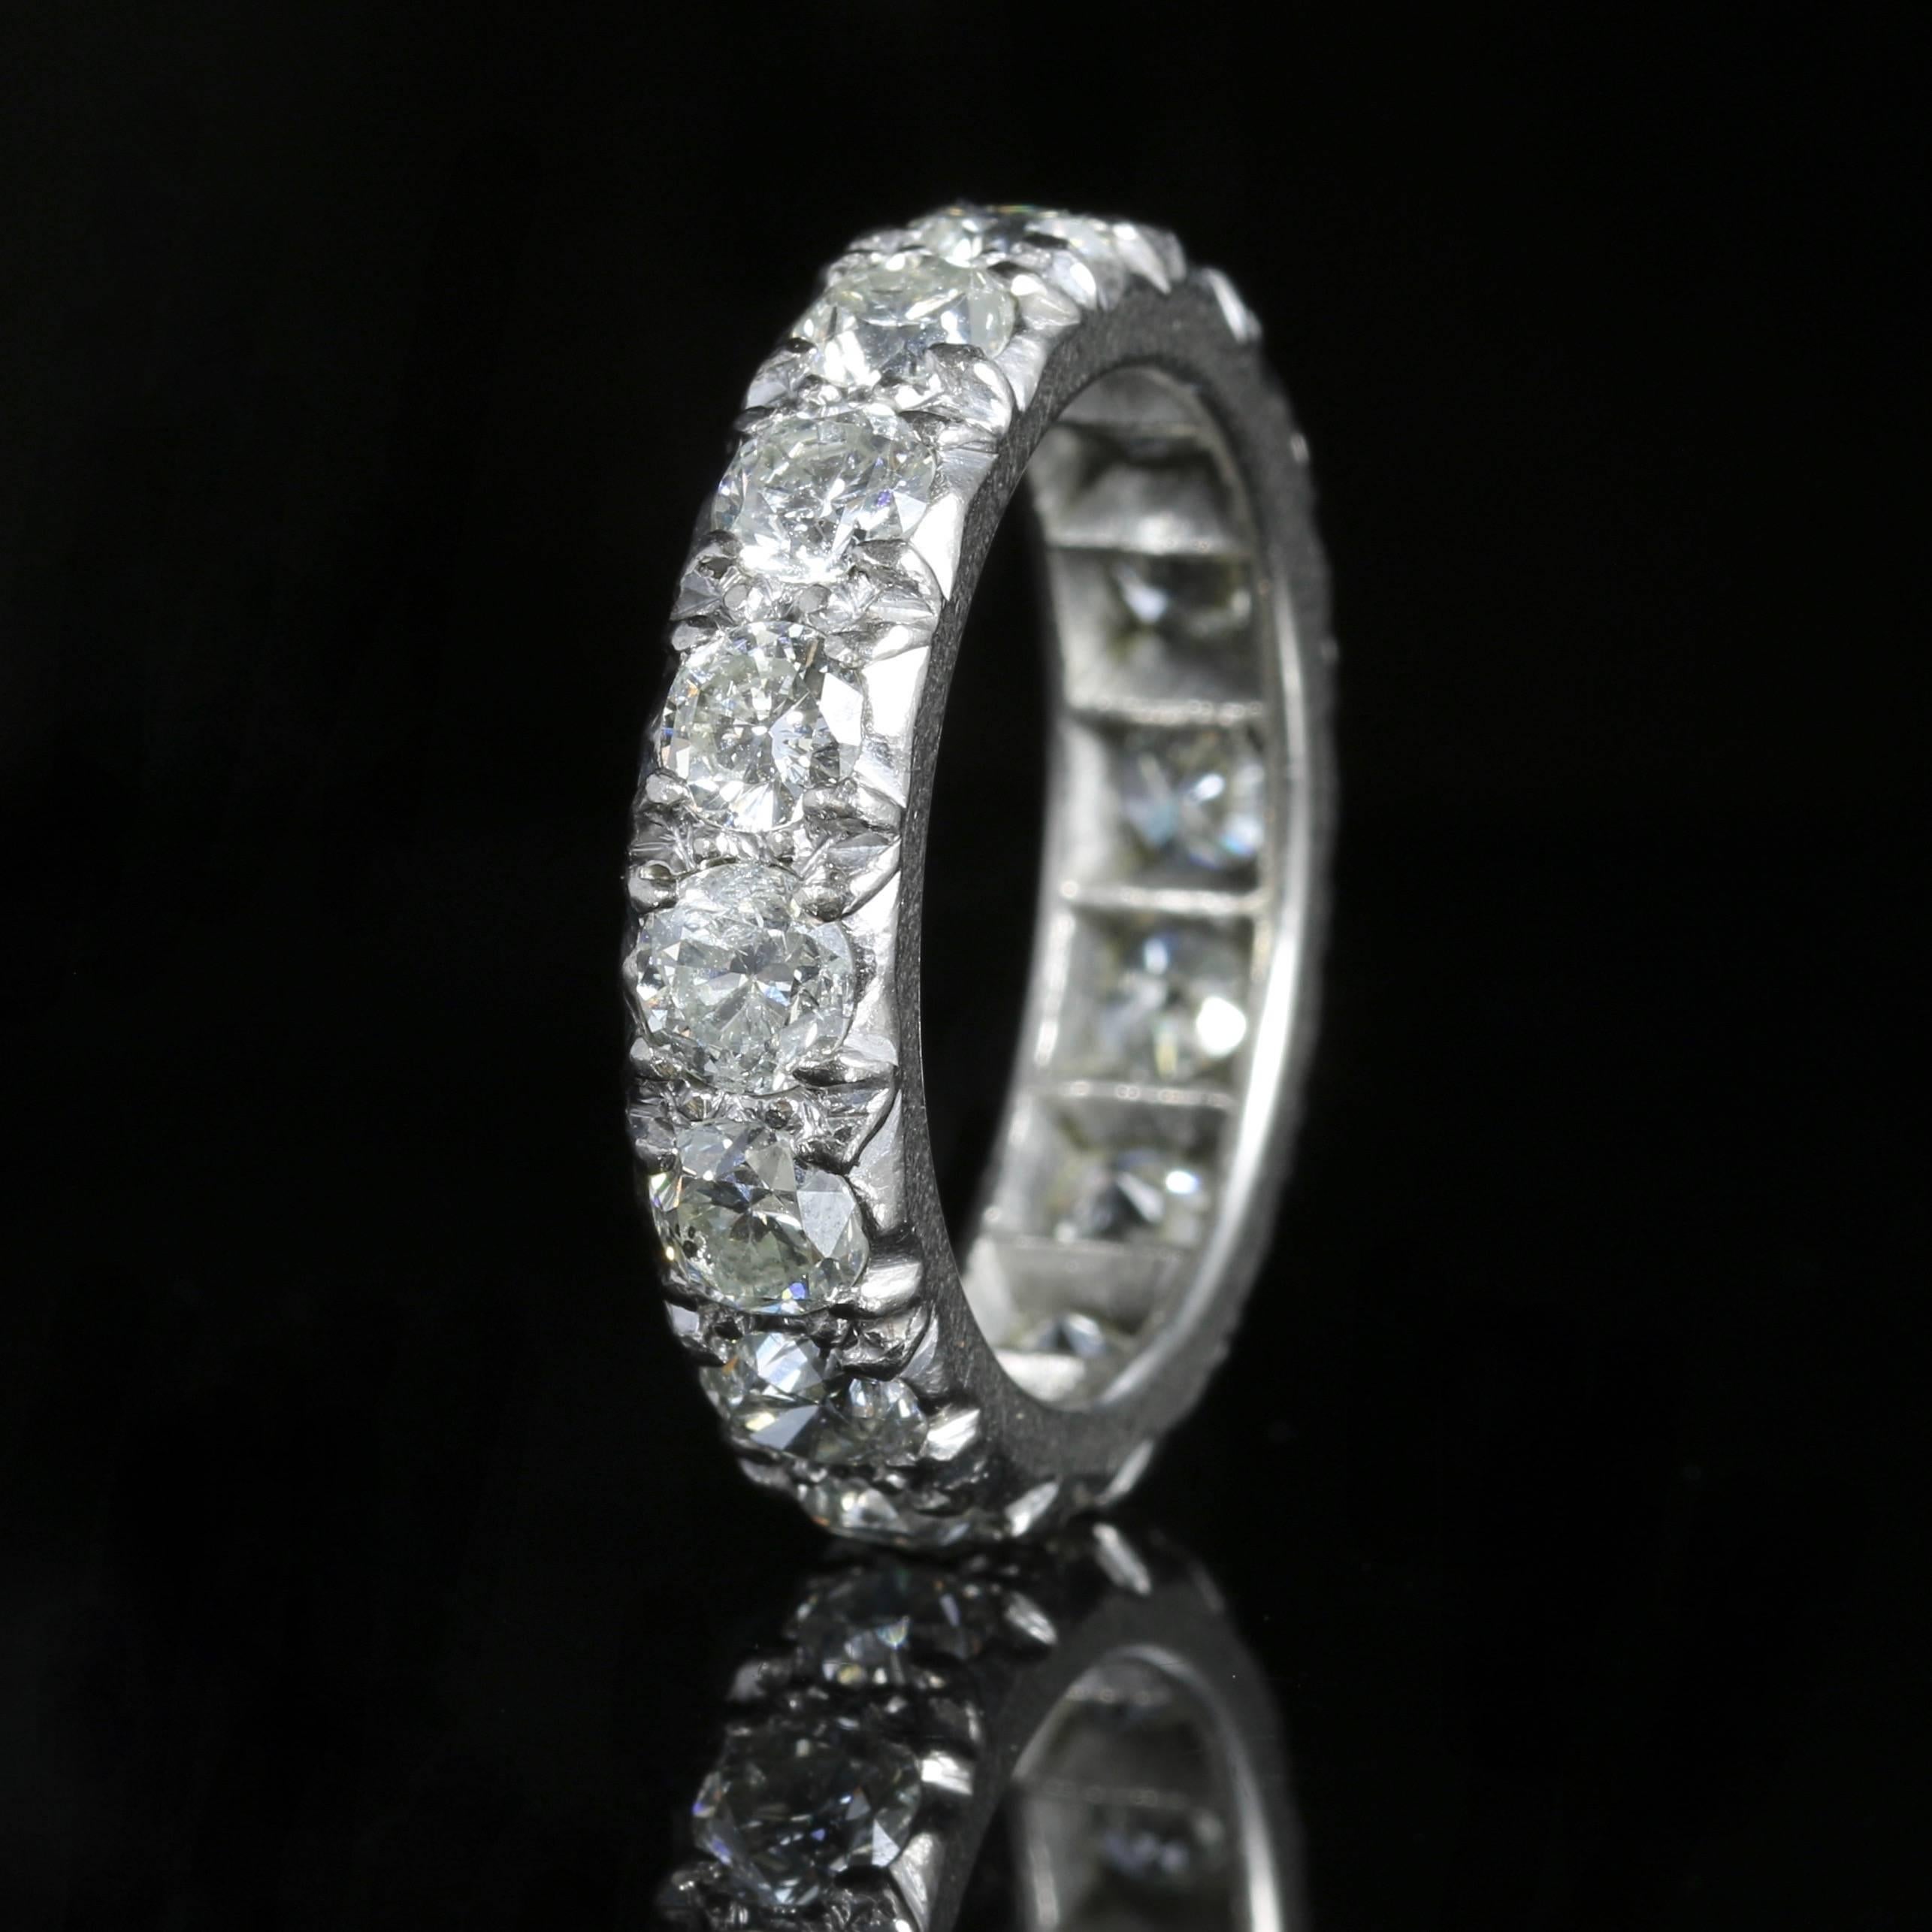 This fabulous Edwardian Diamond full eternity ring is a halo of old cut Diamonds. Set in Platinum.

There are 16 Diamonds in total, each one is approx. 0.24ct in size. Approx. 3.84ct in total

Each Diamond is SI 1 H Colour.

Superb clarity and cut